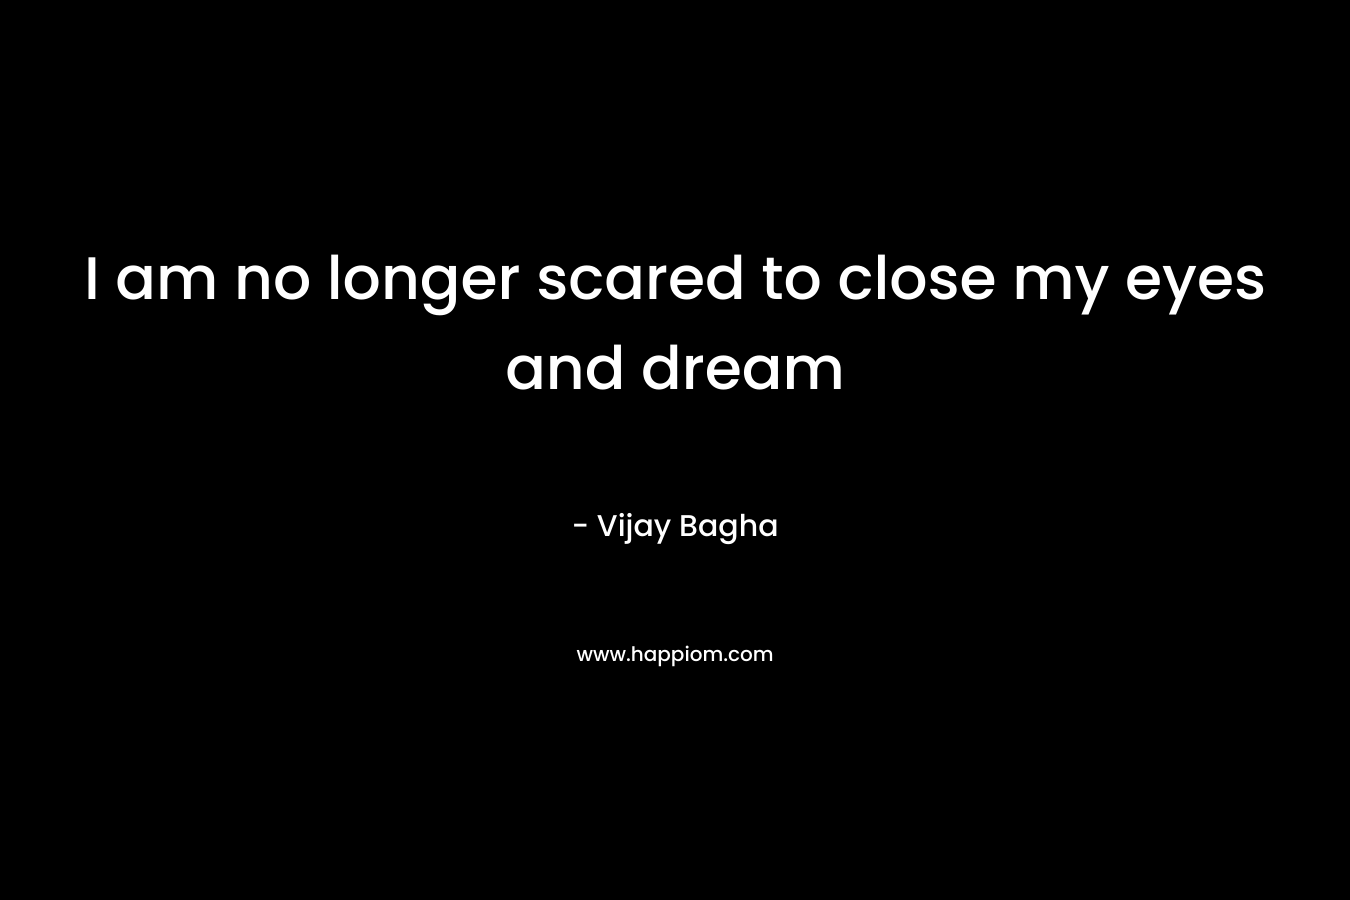 I am no longer scared to close my eyes and dream